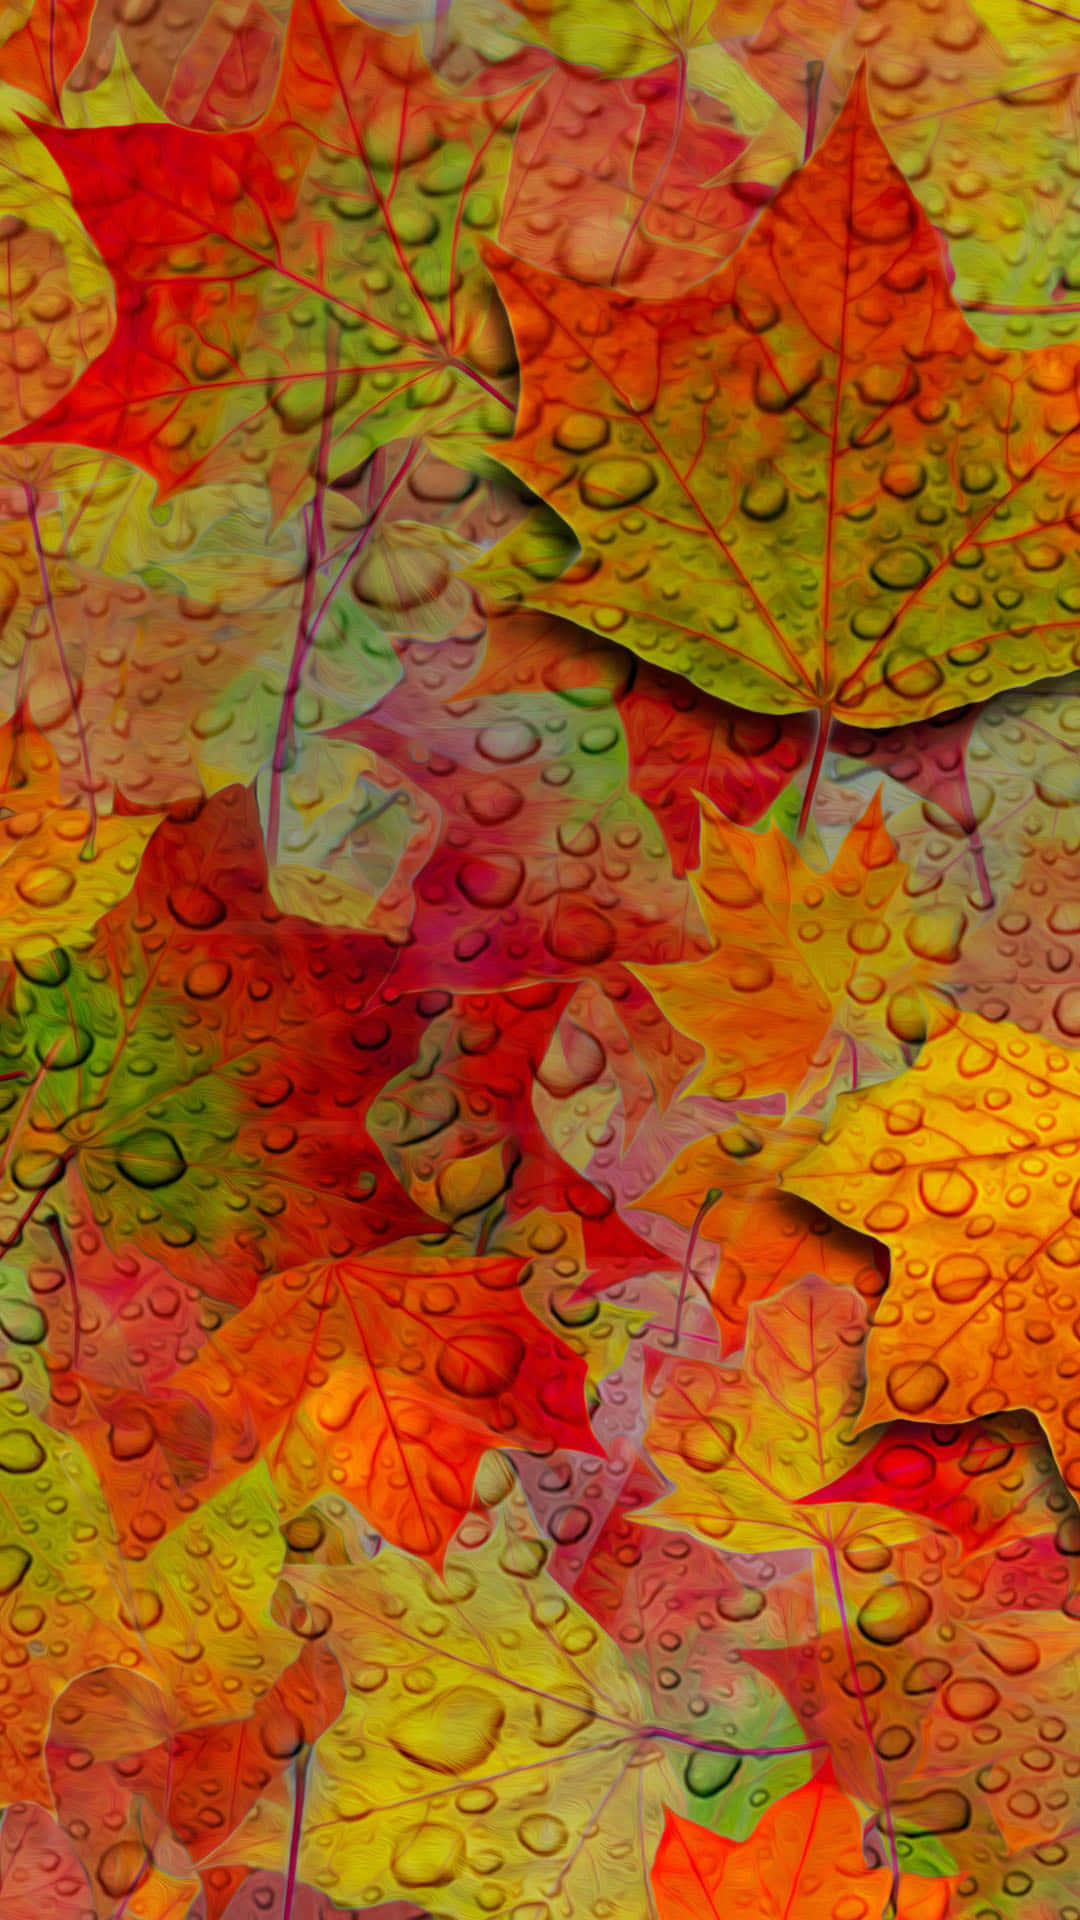 A Colorful Autumn Leaves Covered In Water Droplets Wallpaper